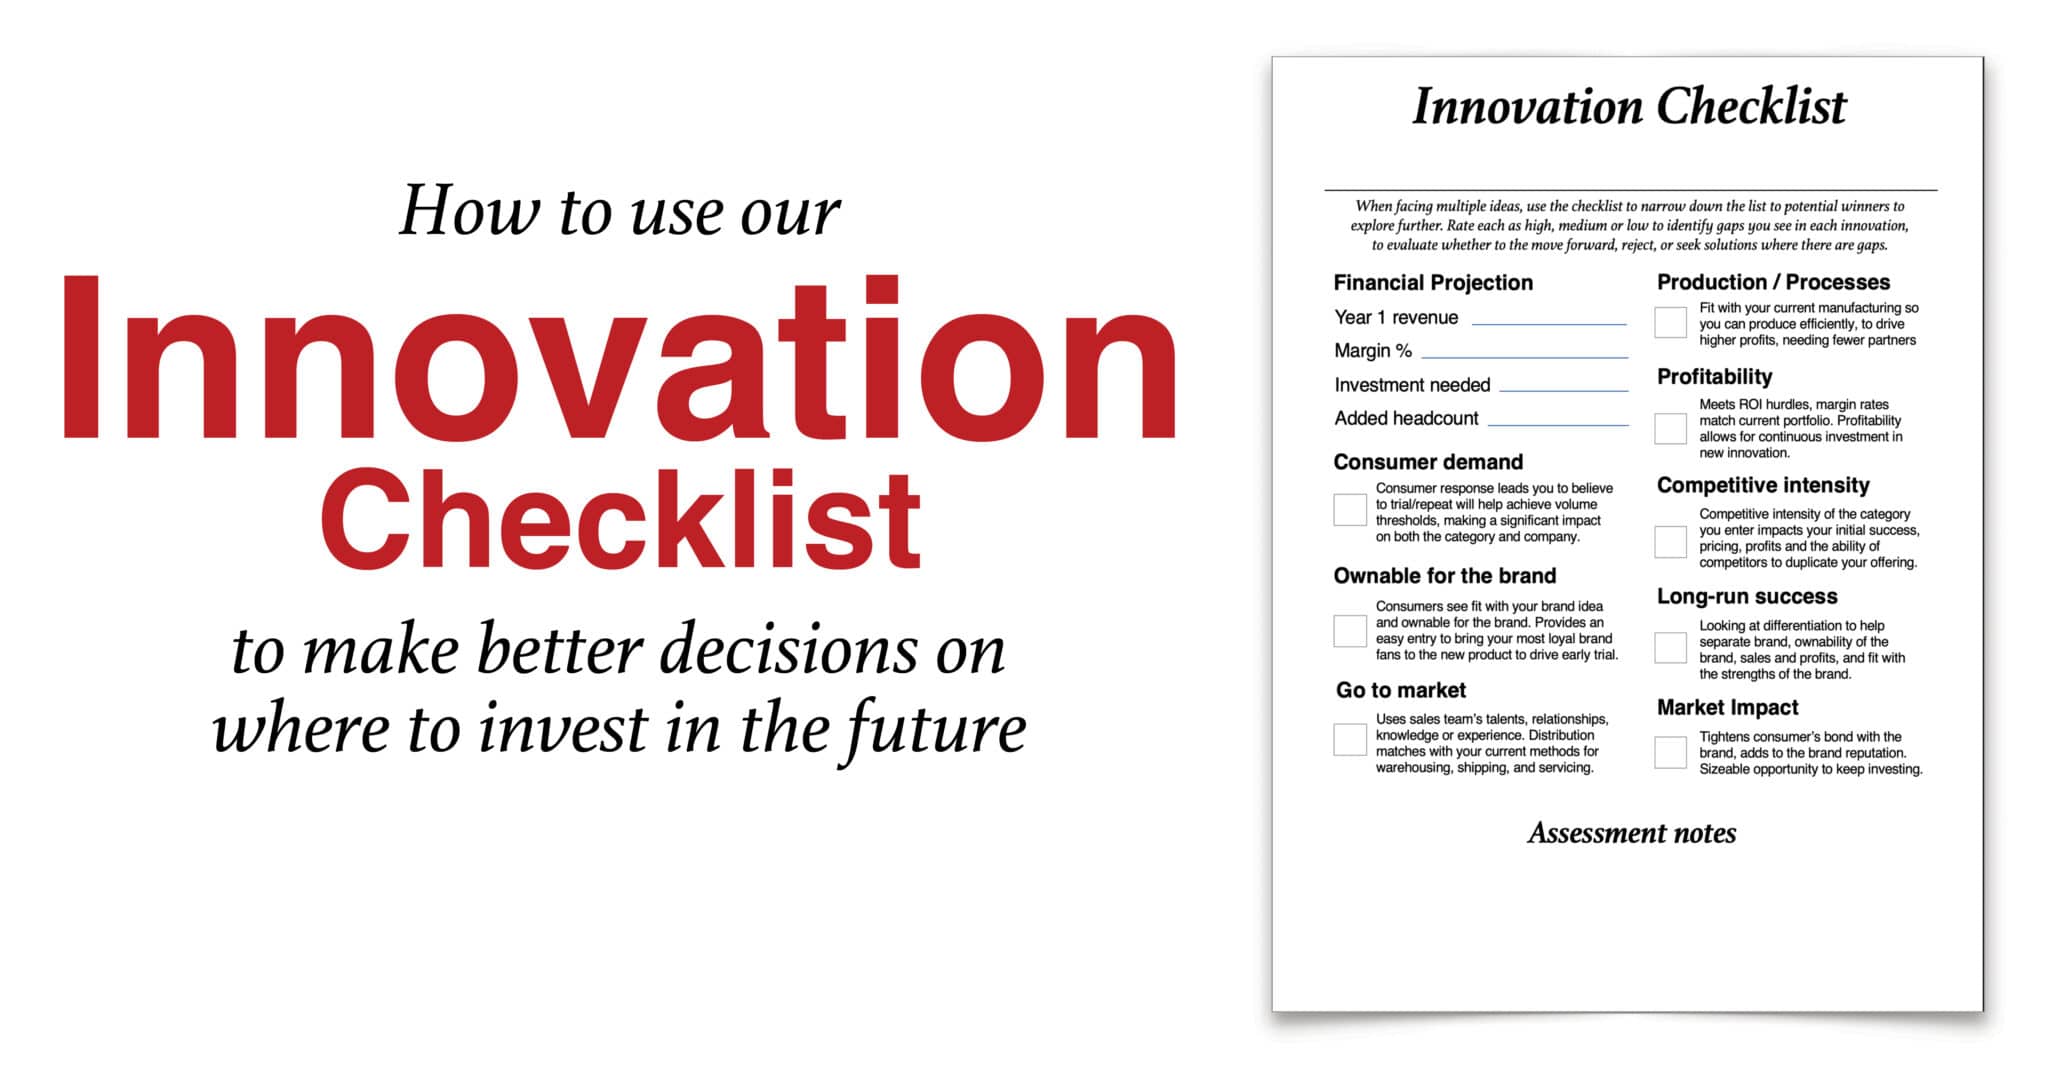 Our Innovation Checklist helps make the best innovation decisions